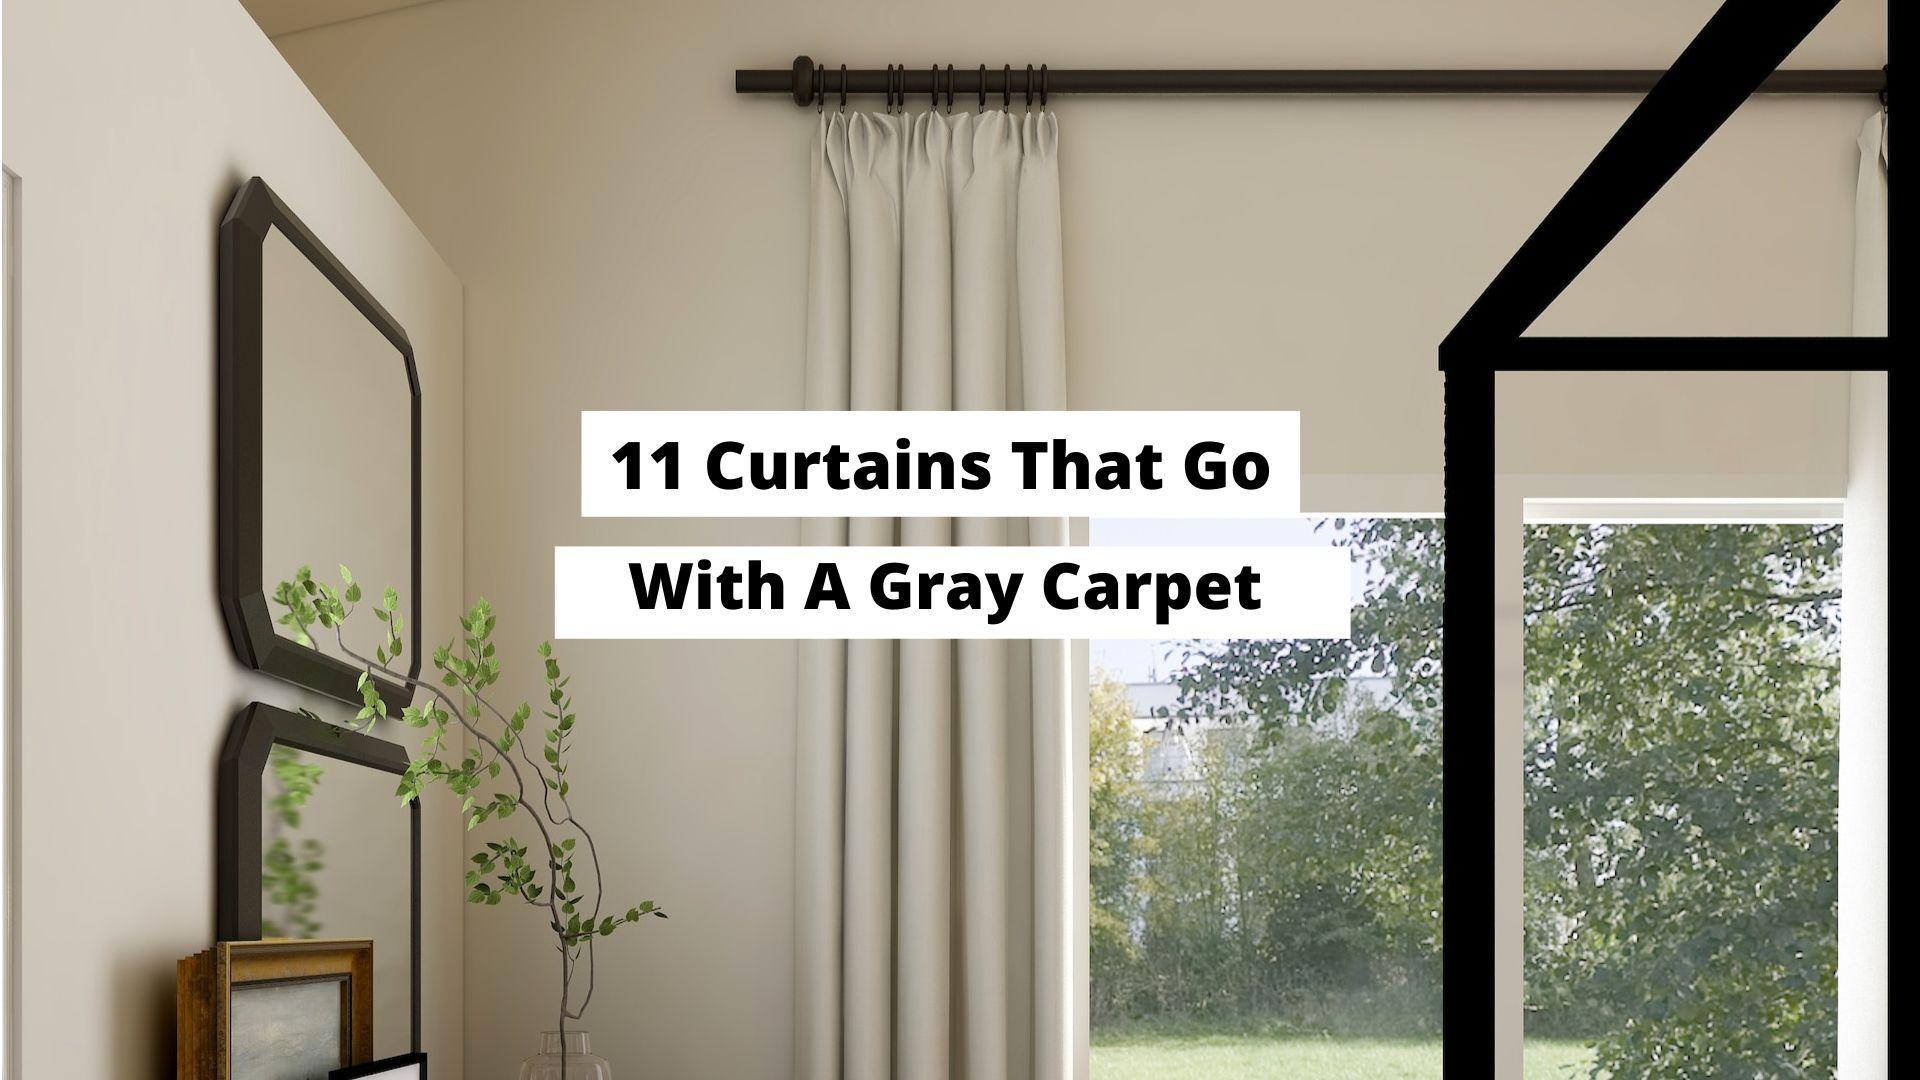 what curtains go with a gray carpet